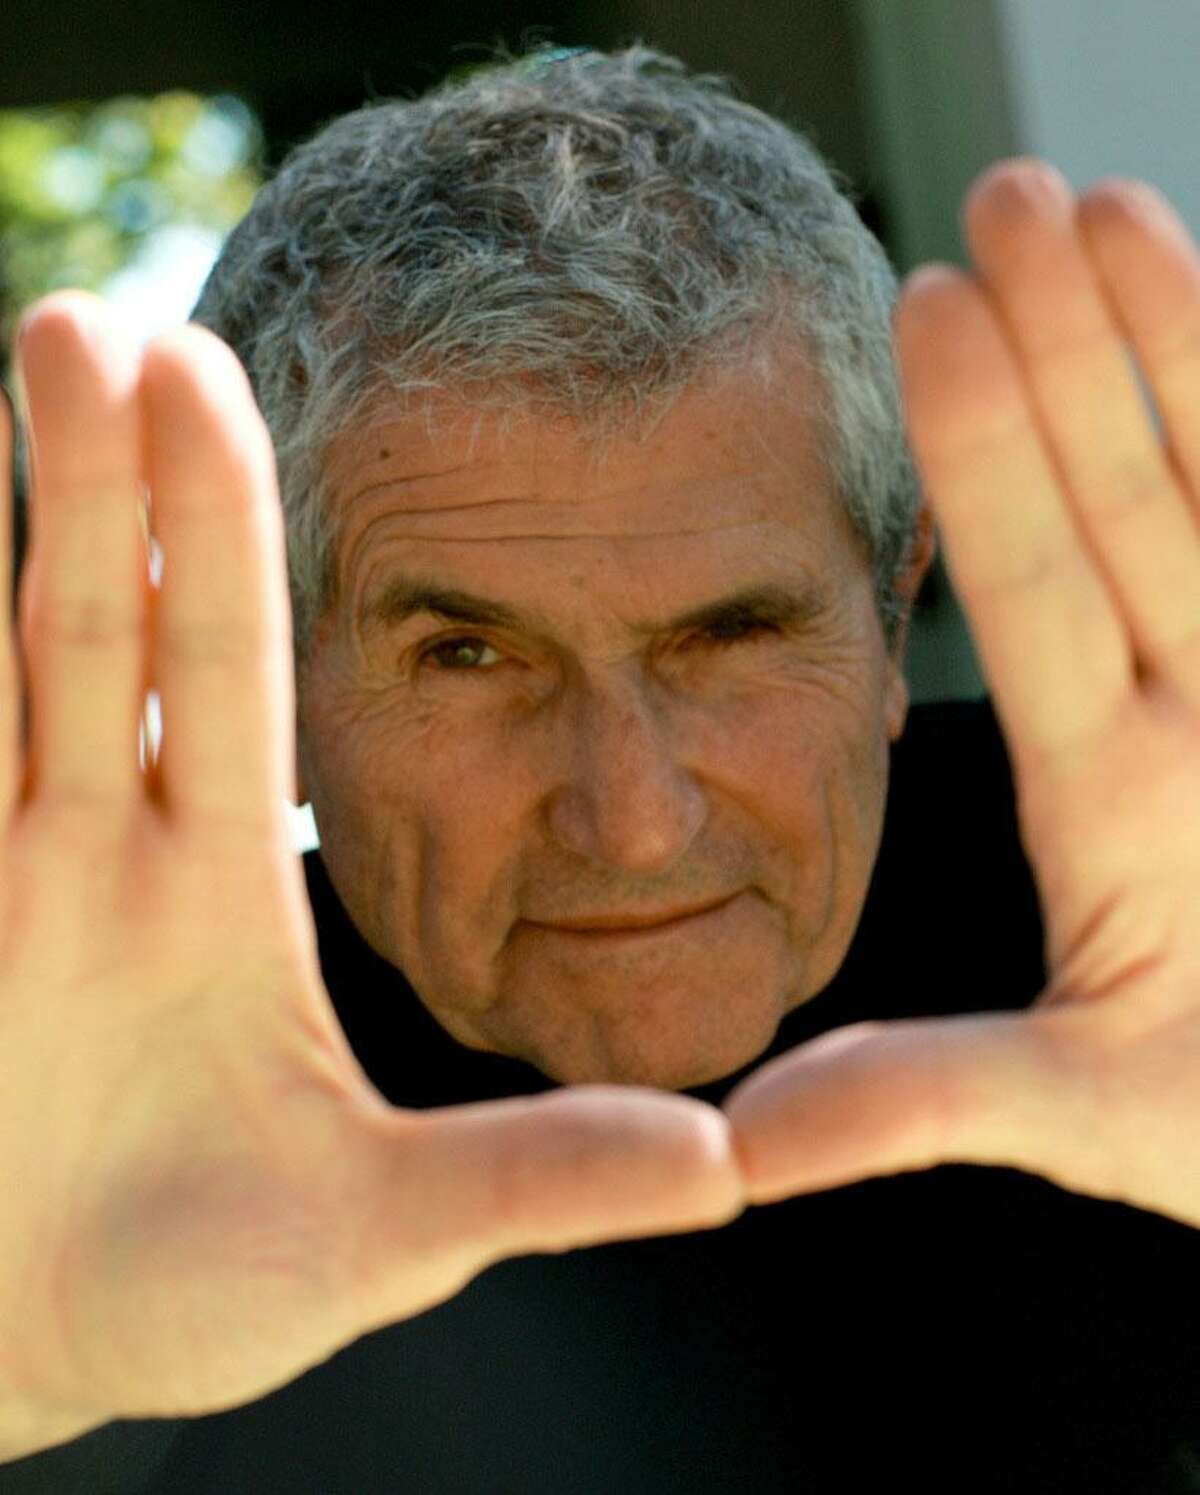 Acclaimed French filmmaker Claude Lelouch will appear at several events during the Alliance Française of Greenwich's Focus on French Cinema festival, March 27 to April 4.